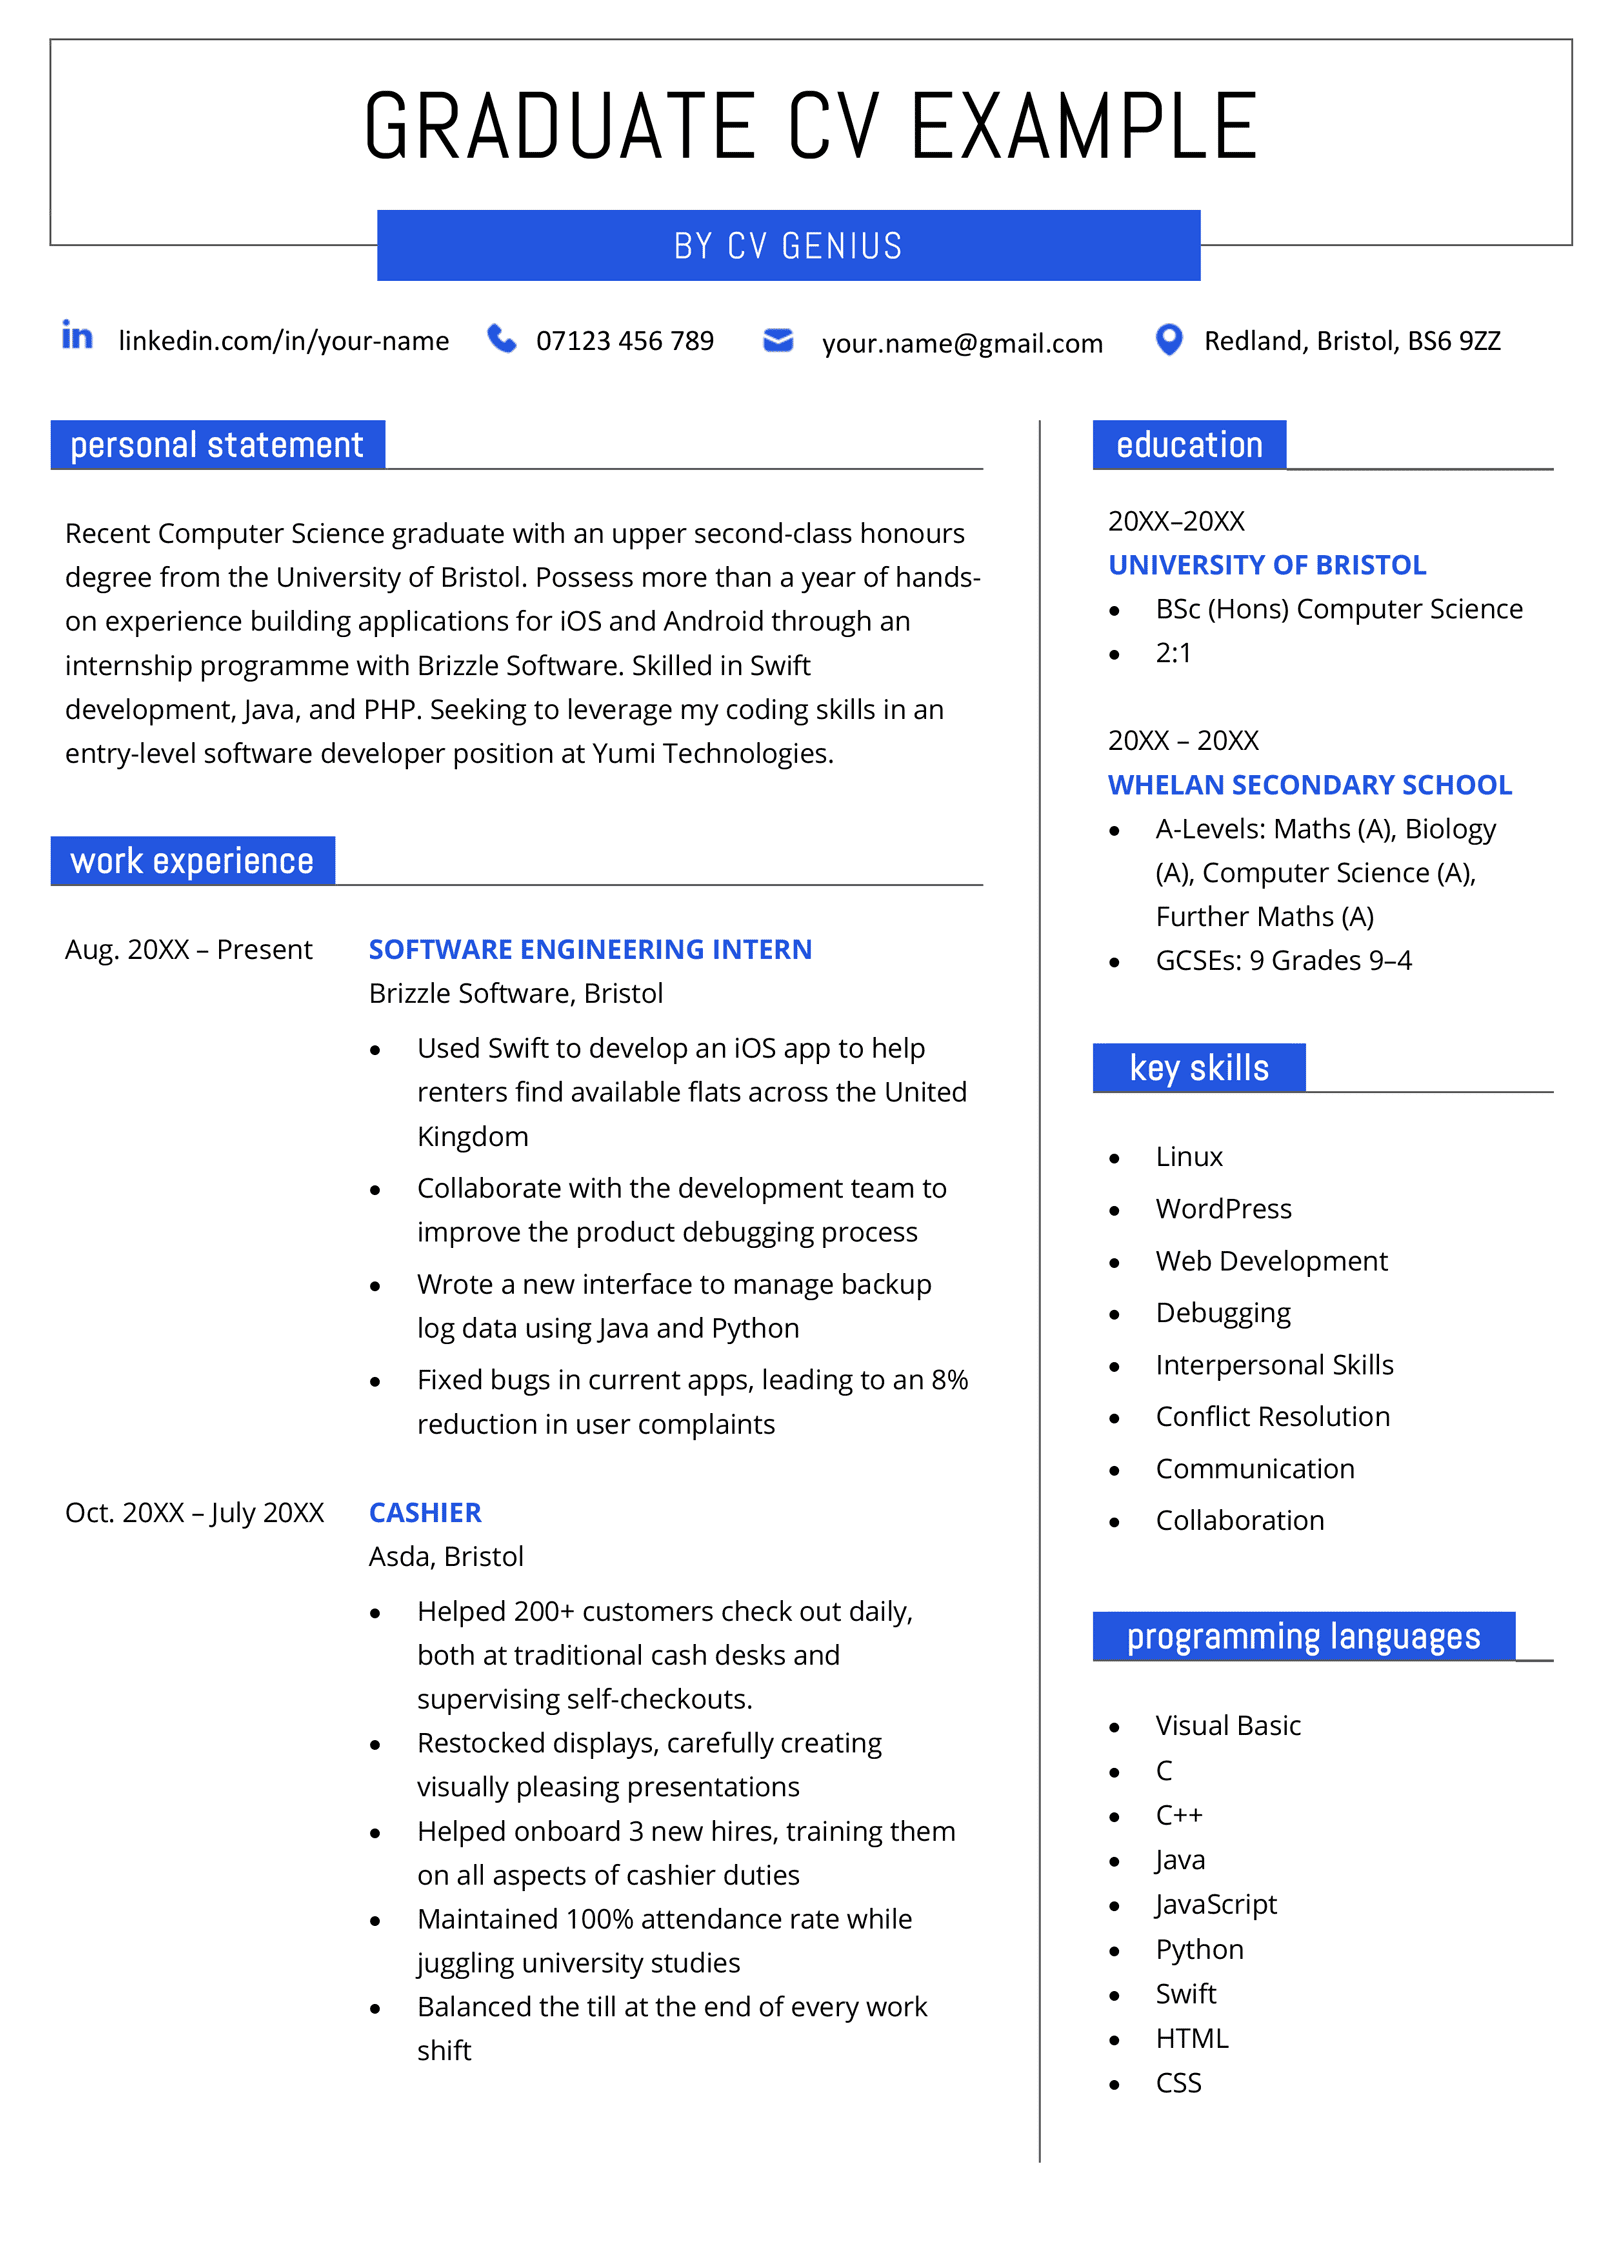 A graduate CV example on a creative CV template, featuring a Computer Science graduate looking for a job.